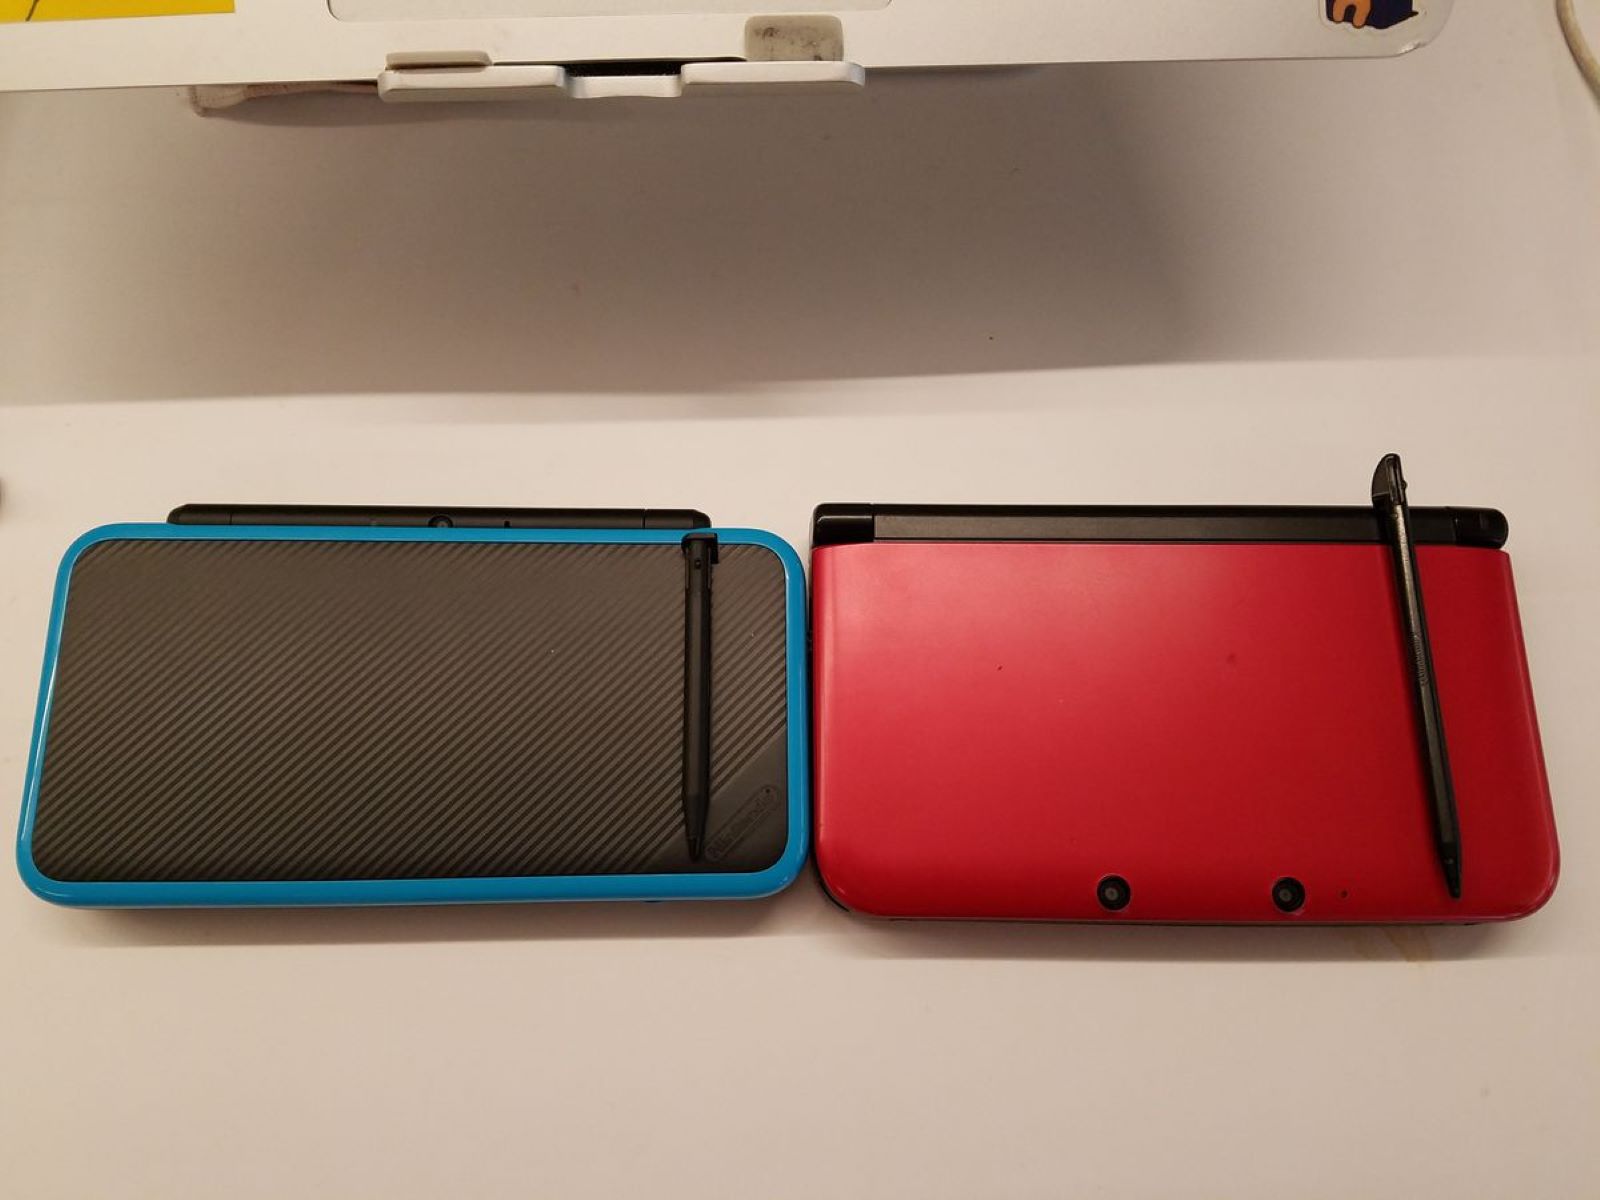 3ds-xl-stylus-spotting-finding-the-essential-tool